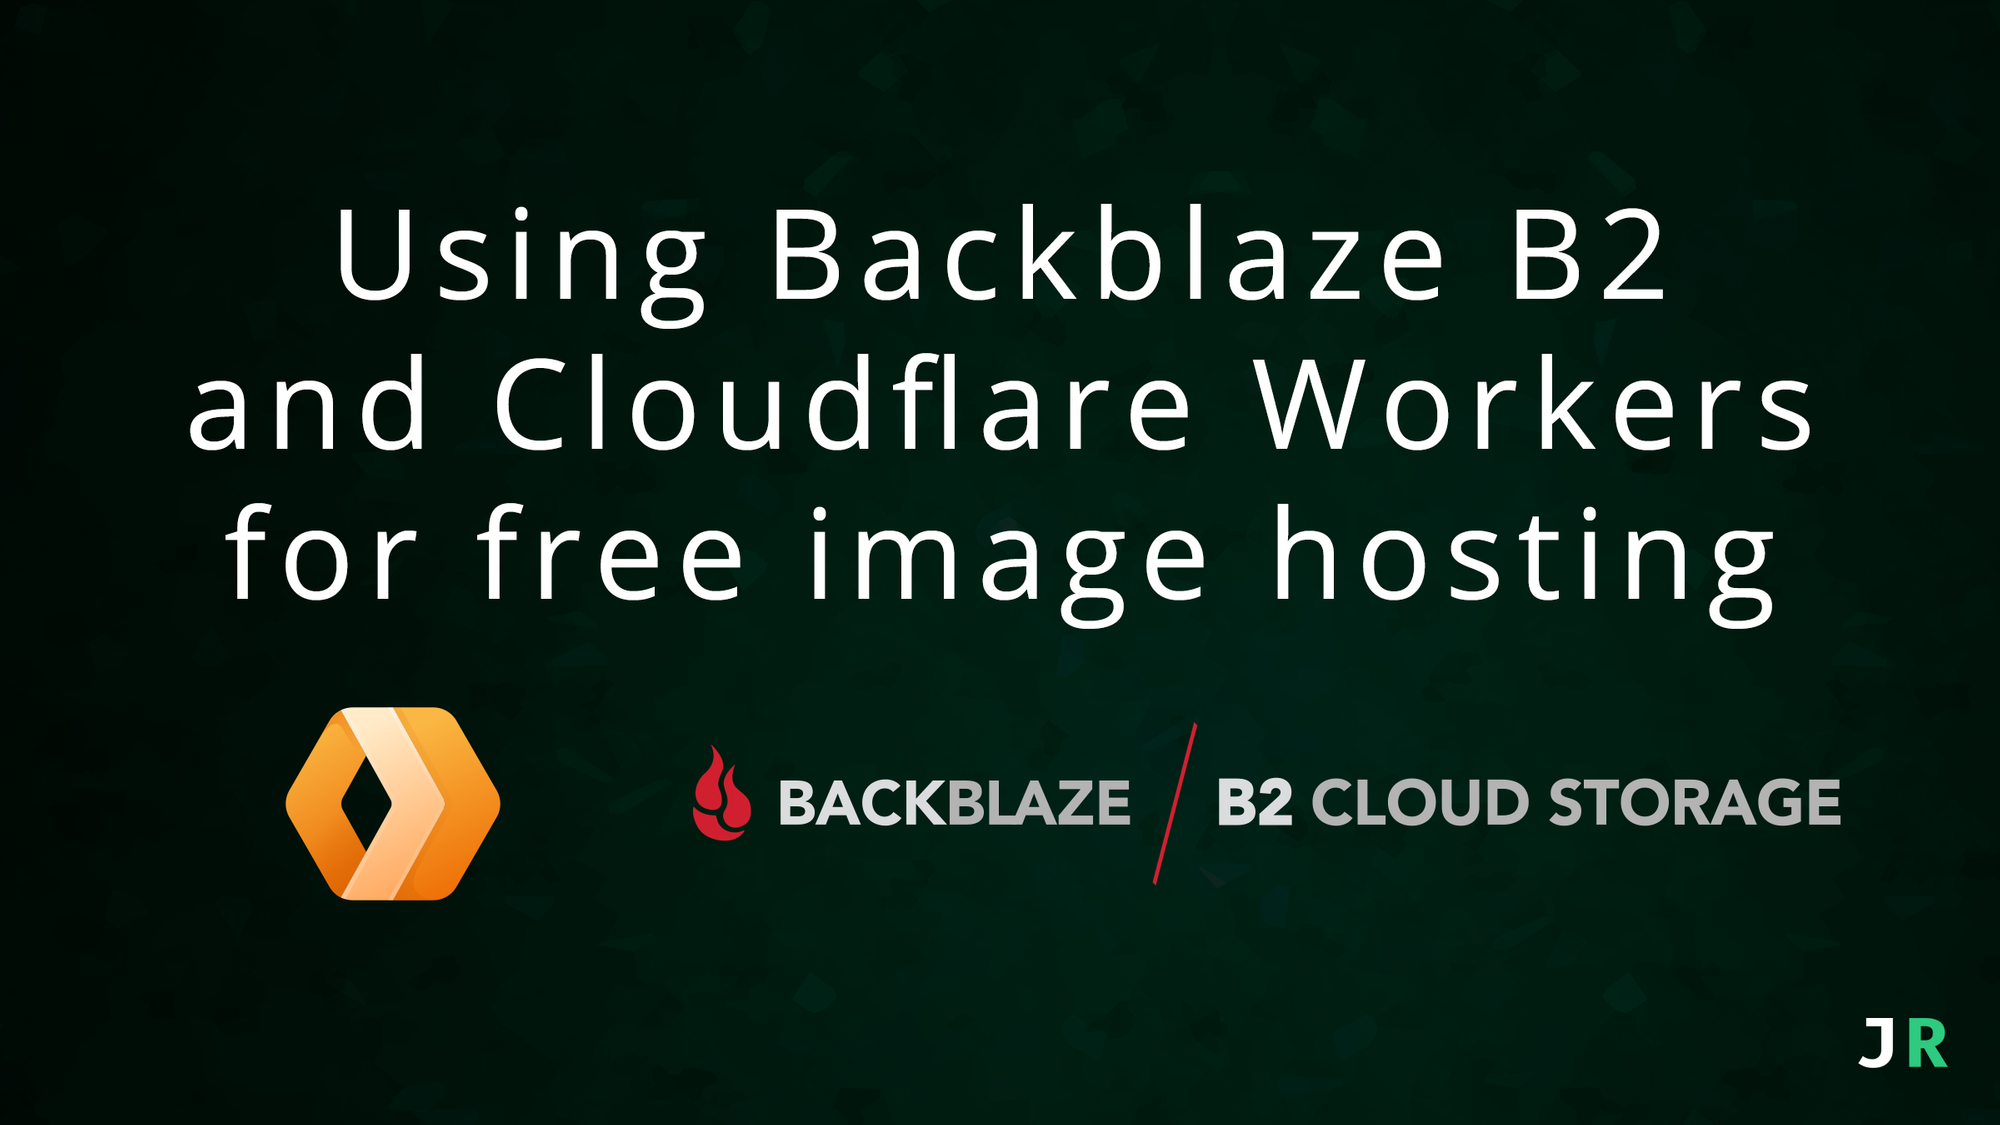 Using Backblaze B2 and Cloudflare Workers for free image hosting thumbnail